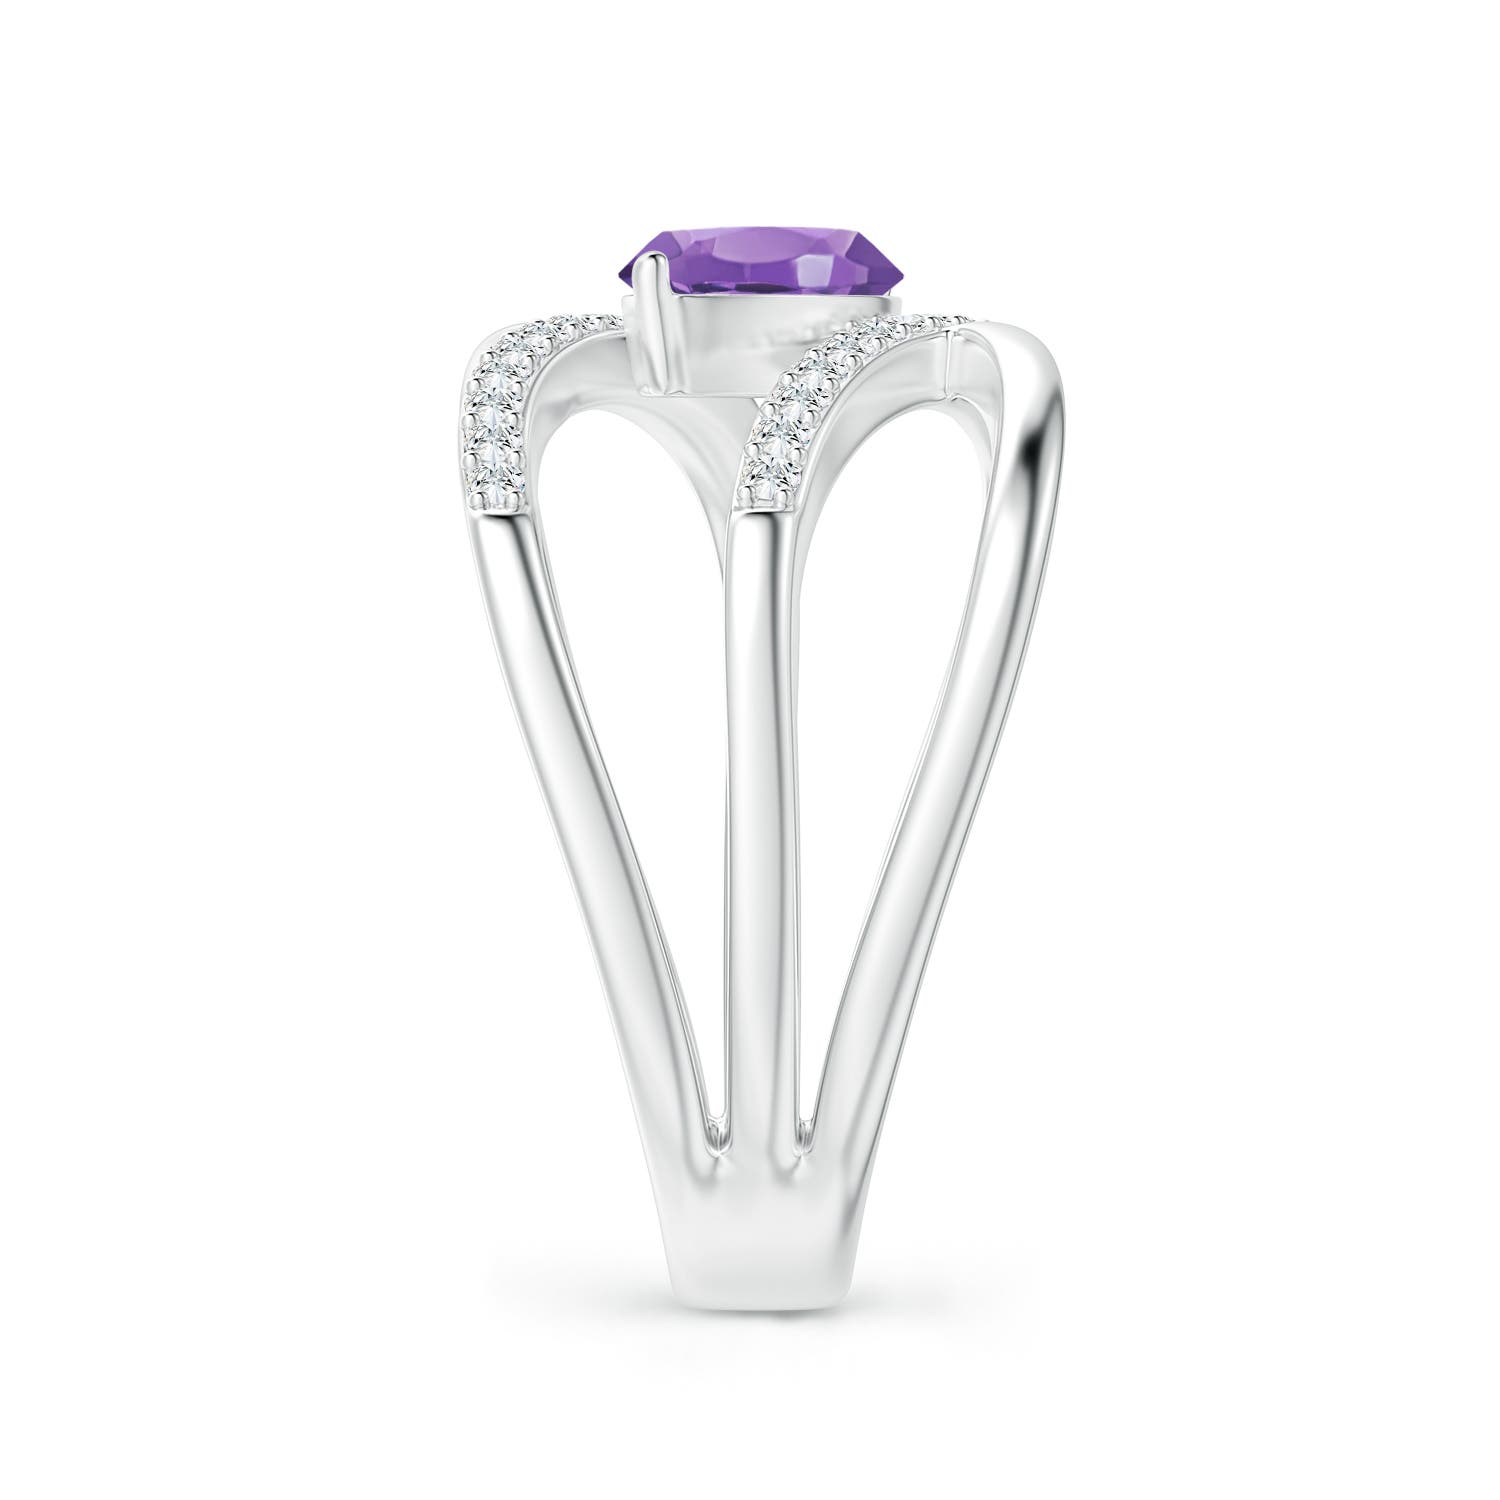 AA - Amethyst / 1.13 CT / 14 KT White Gold